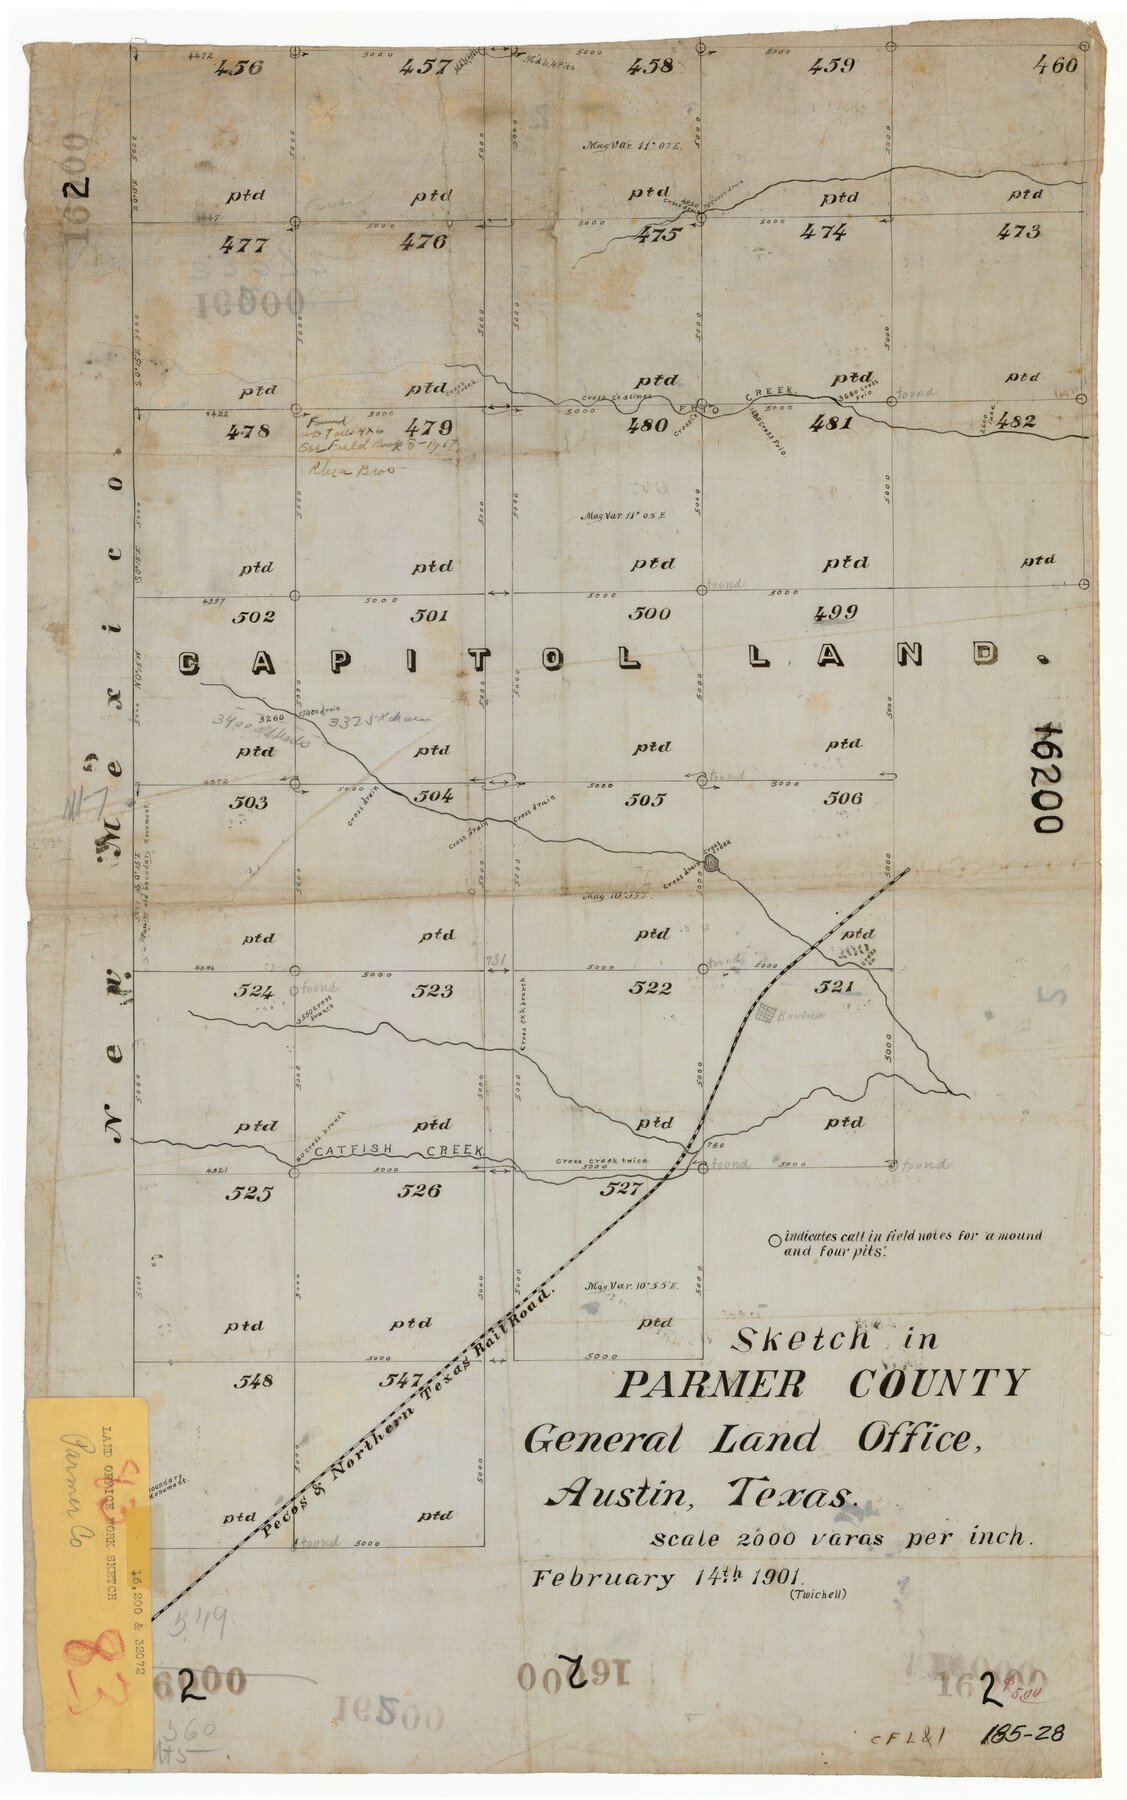 91644, Sketch in Parmer County, Twichell Survey Records